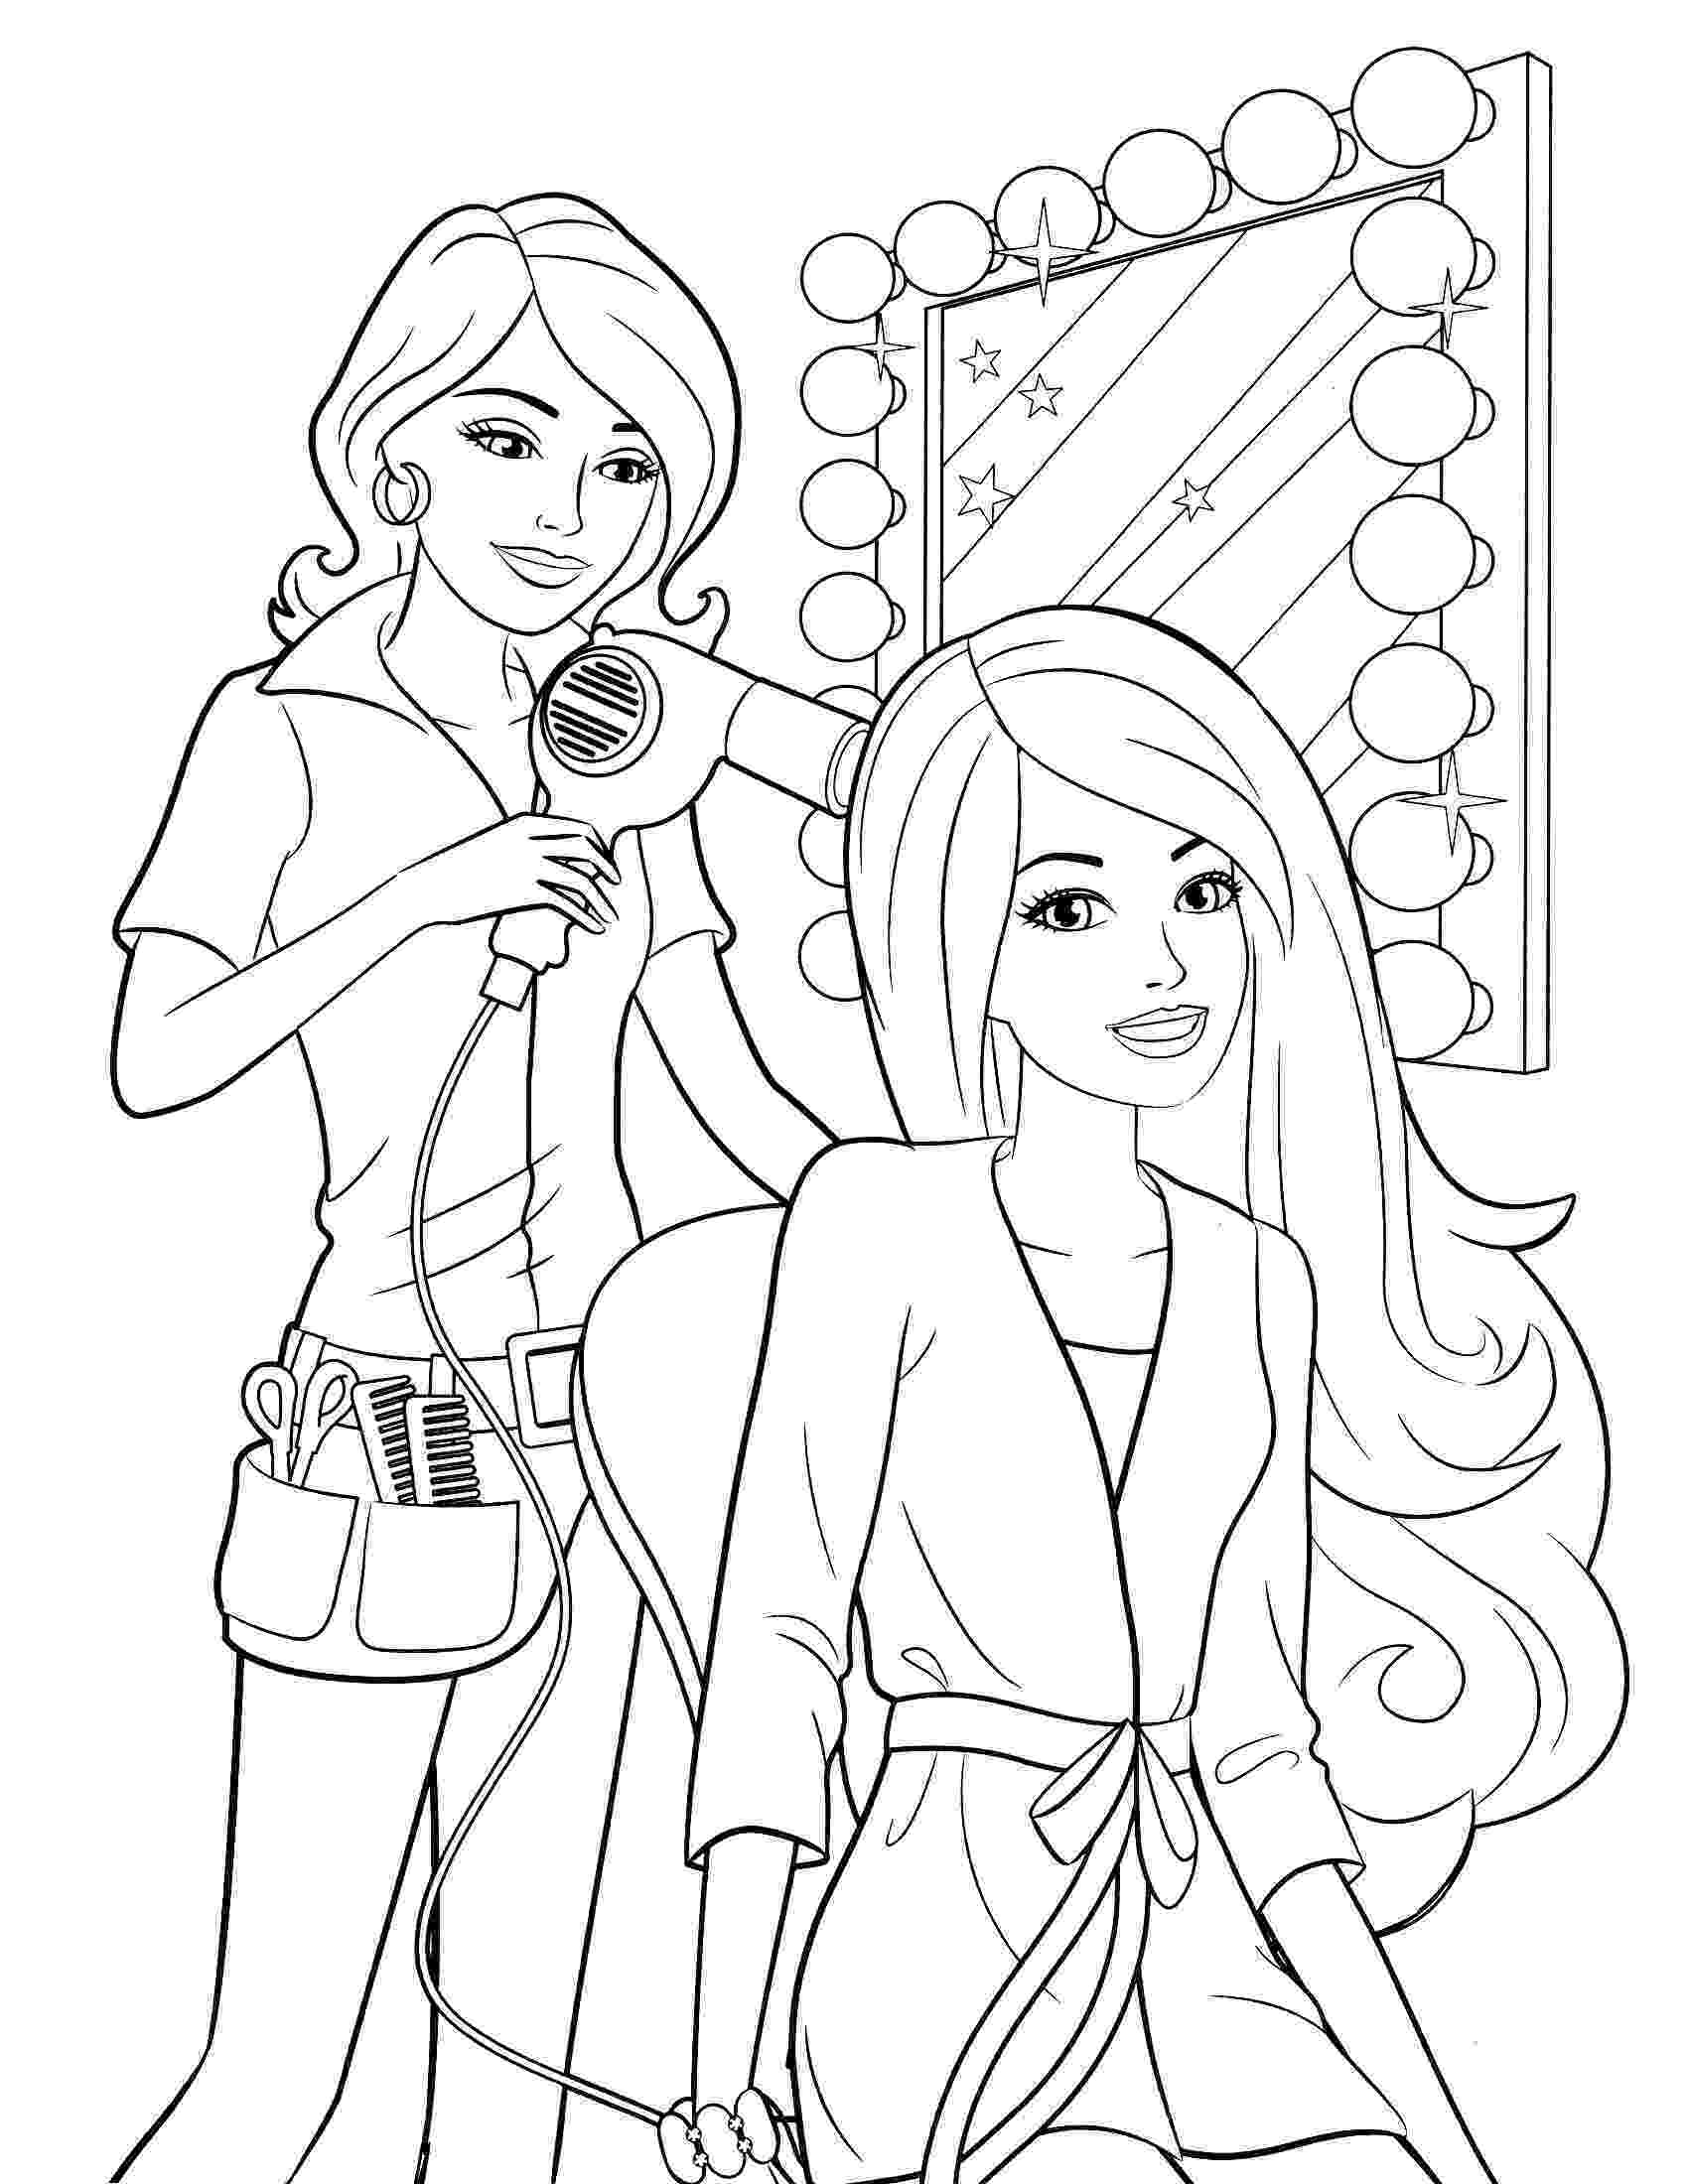 coloring sheets for girls to print coloring pages for girls best coloring pages for kids print girls coloring to sheets for 